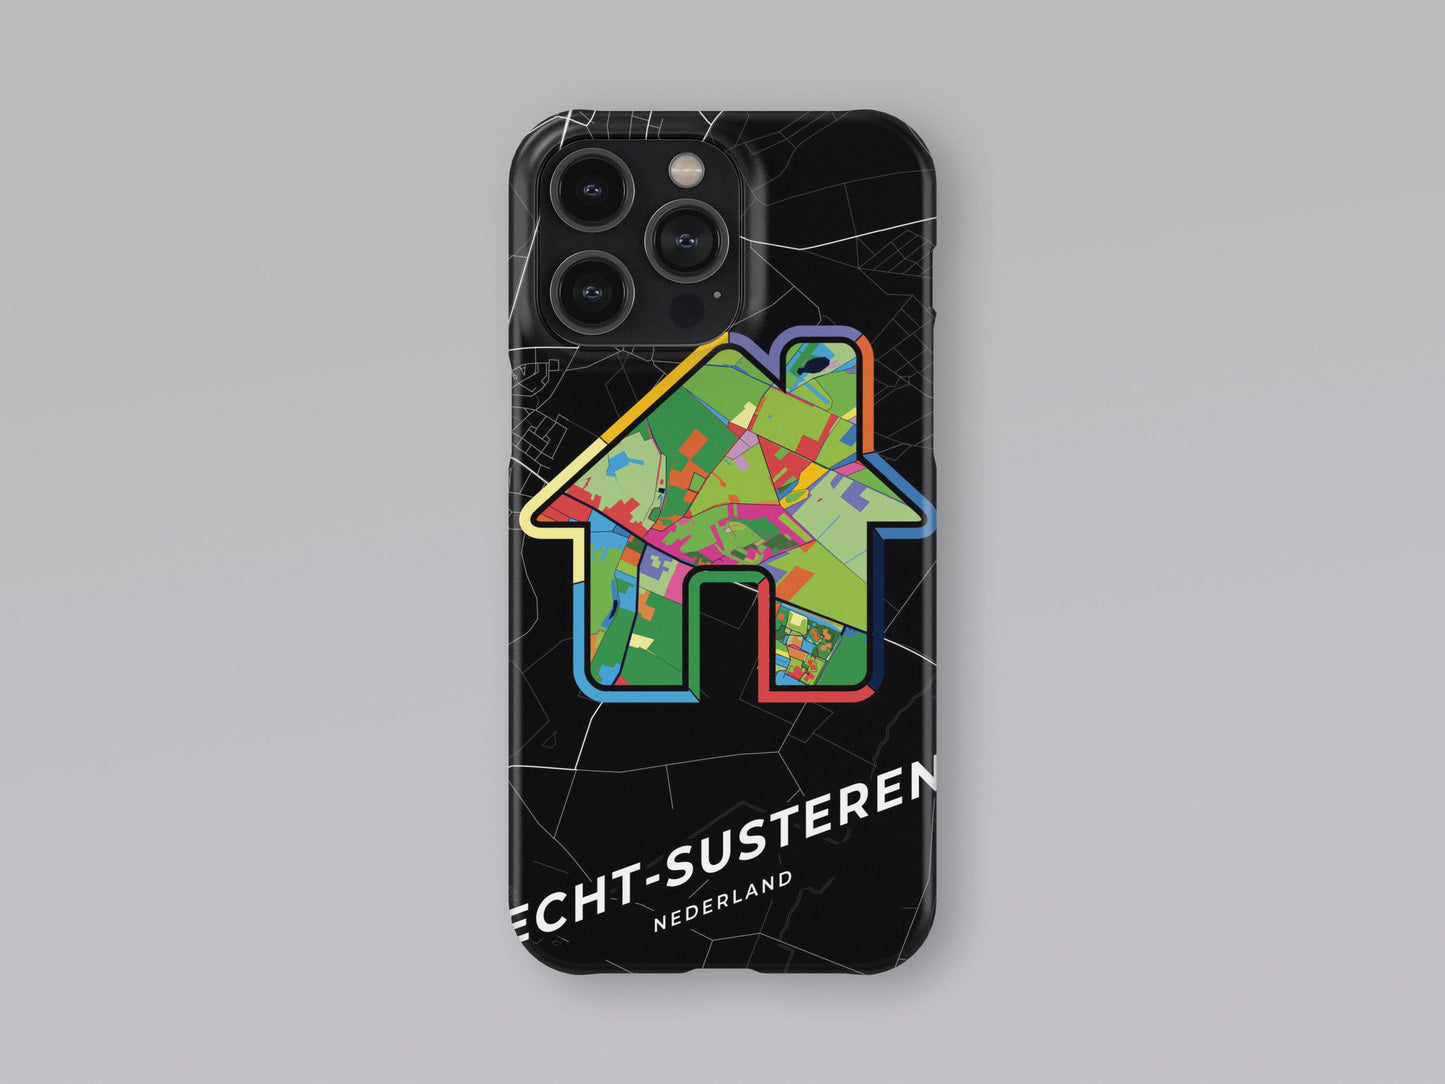 Echt-Susteren Netherlands slim phone case with colorful icon. Birthday, wedding or housewarming gift. Couple match cases. 3